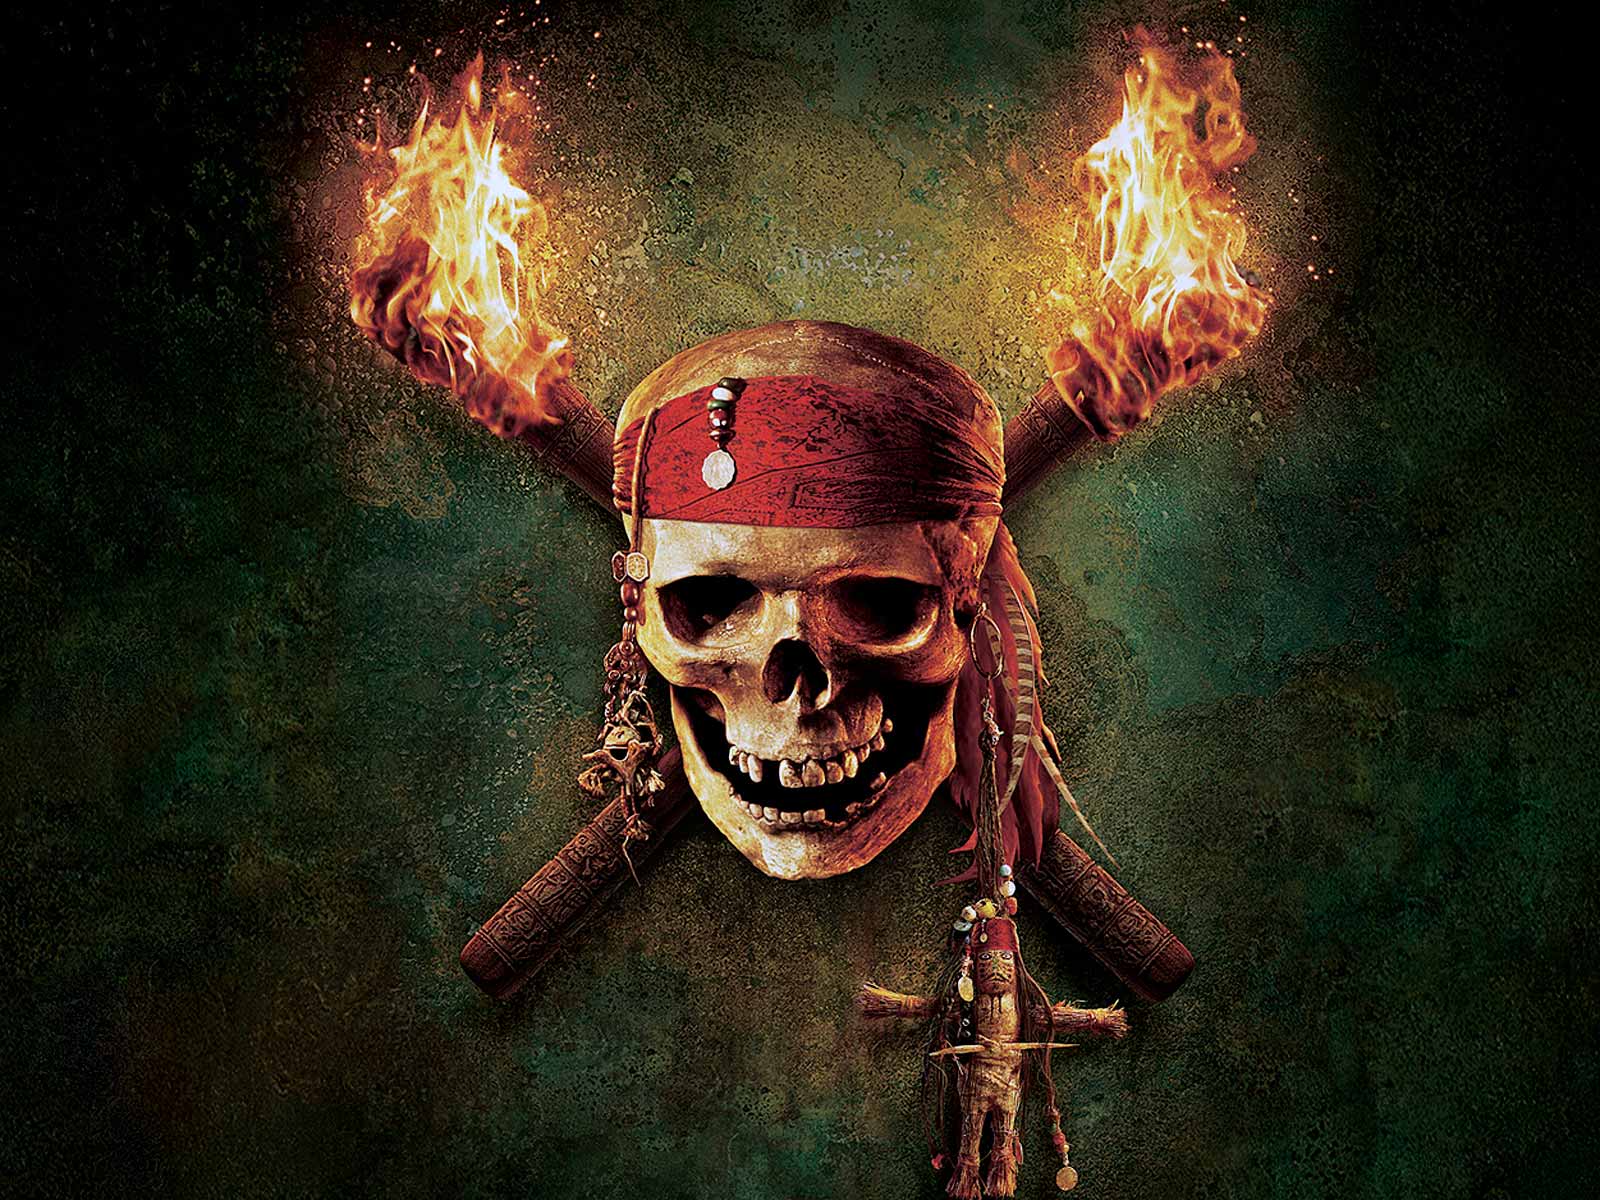 Pirate Skull Logo From The Pirates Of Caribbean Movies Wallpaper